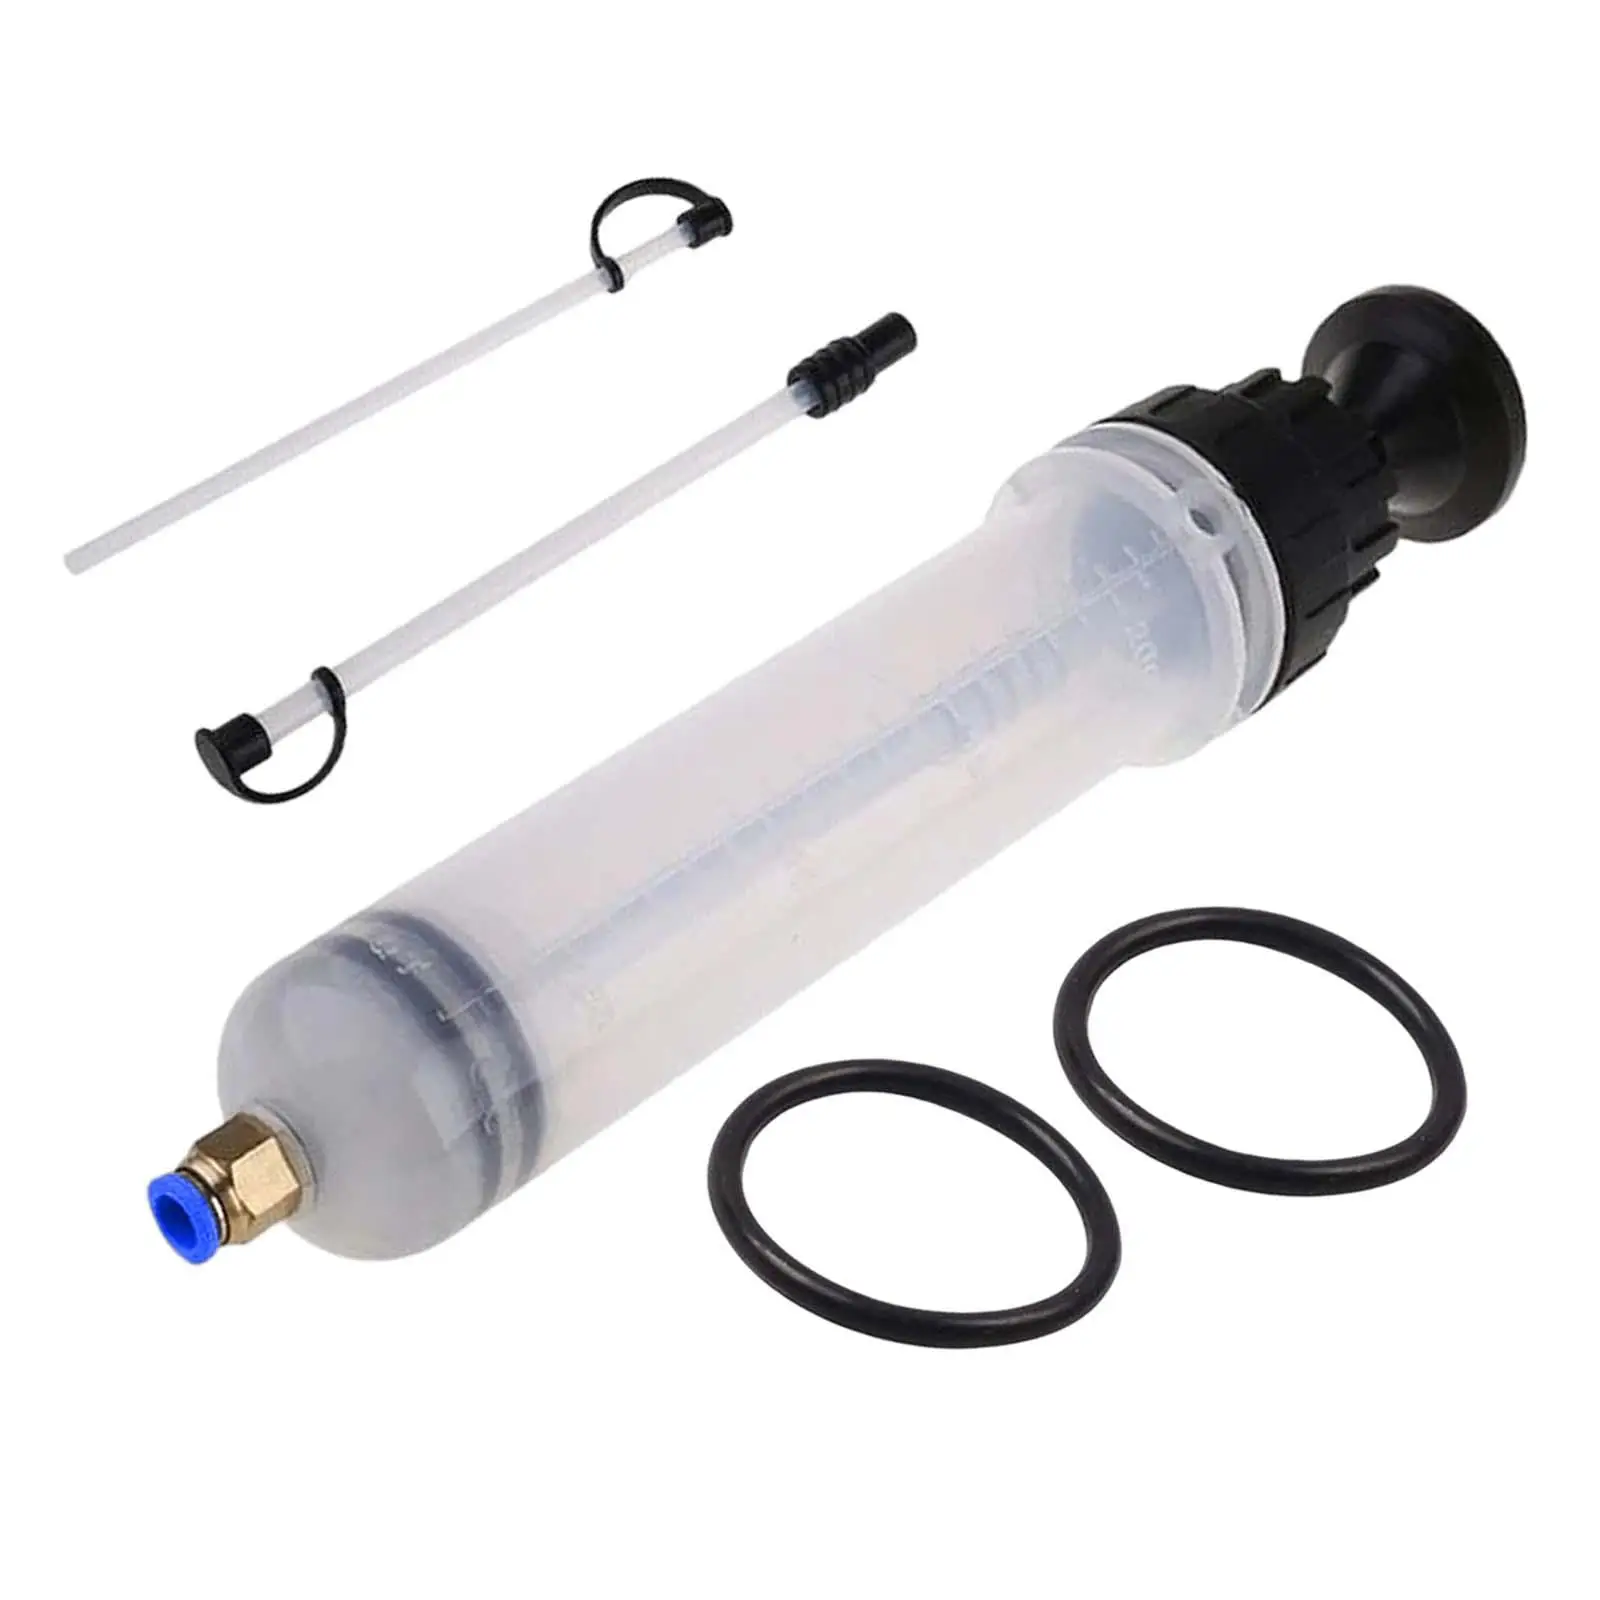 Auto Brake Fluid Extractor Fluid Transfer Hand Pump Tool 500cc Oil Change Fluid Extraction for Vehicles Motorcycle RV ATV